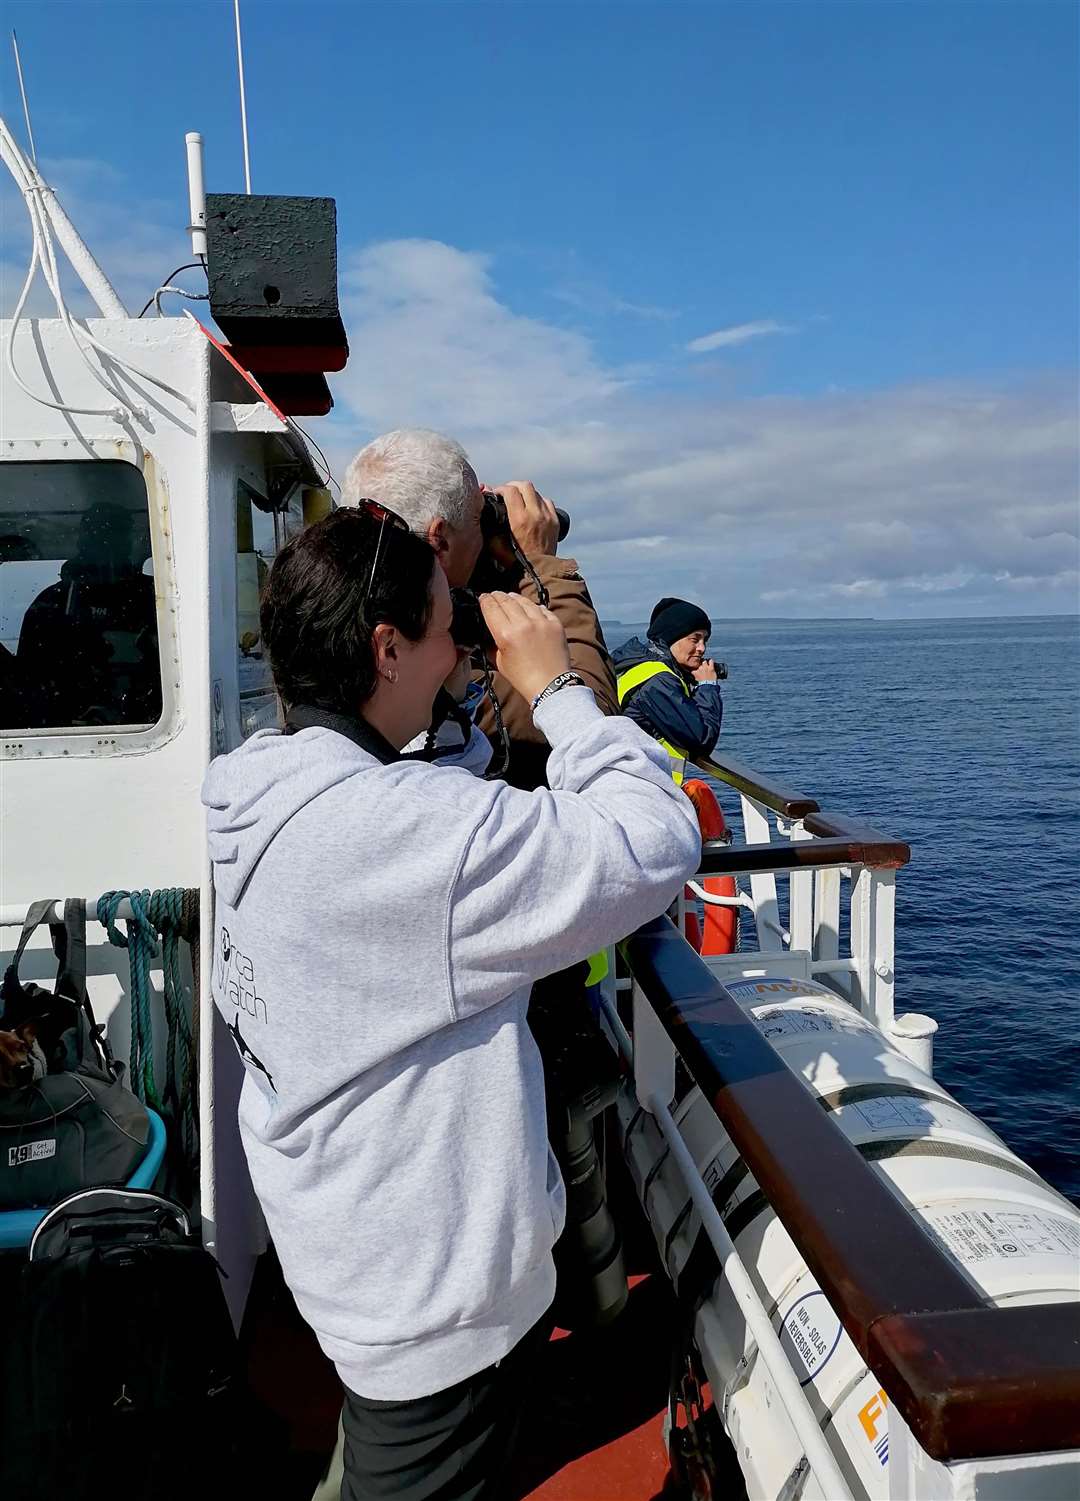 Hazel Masson on the Pentland Venture this week, checking for killer whales.